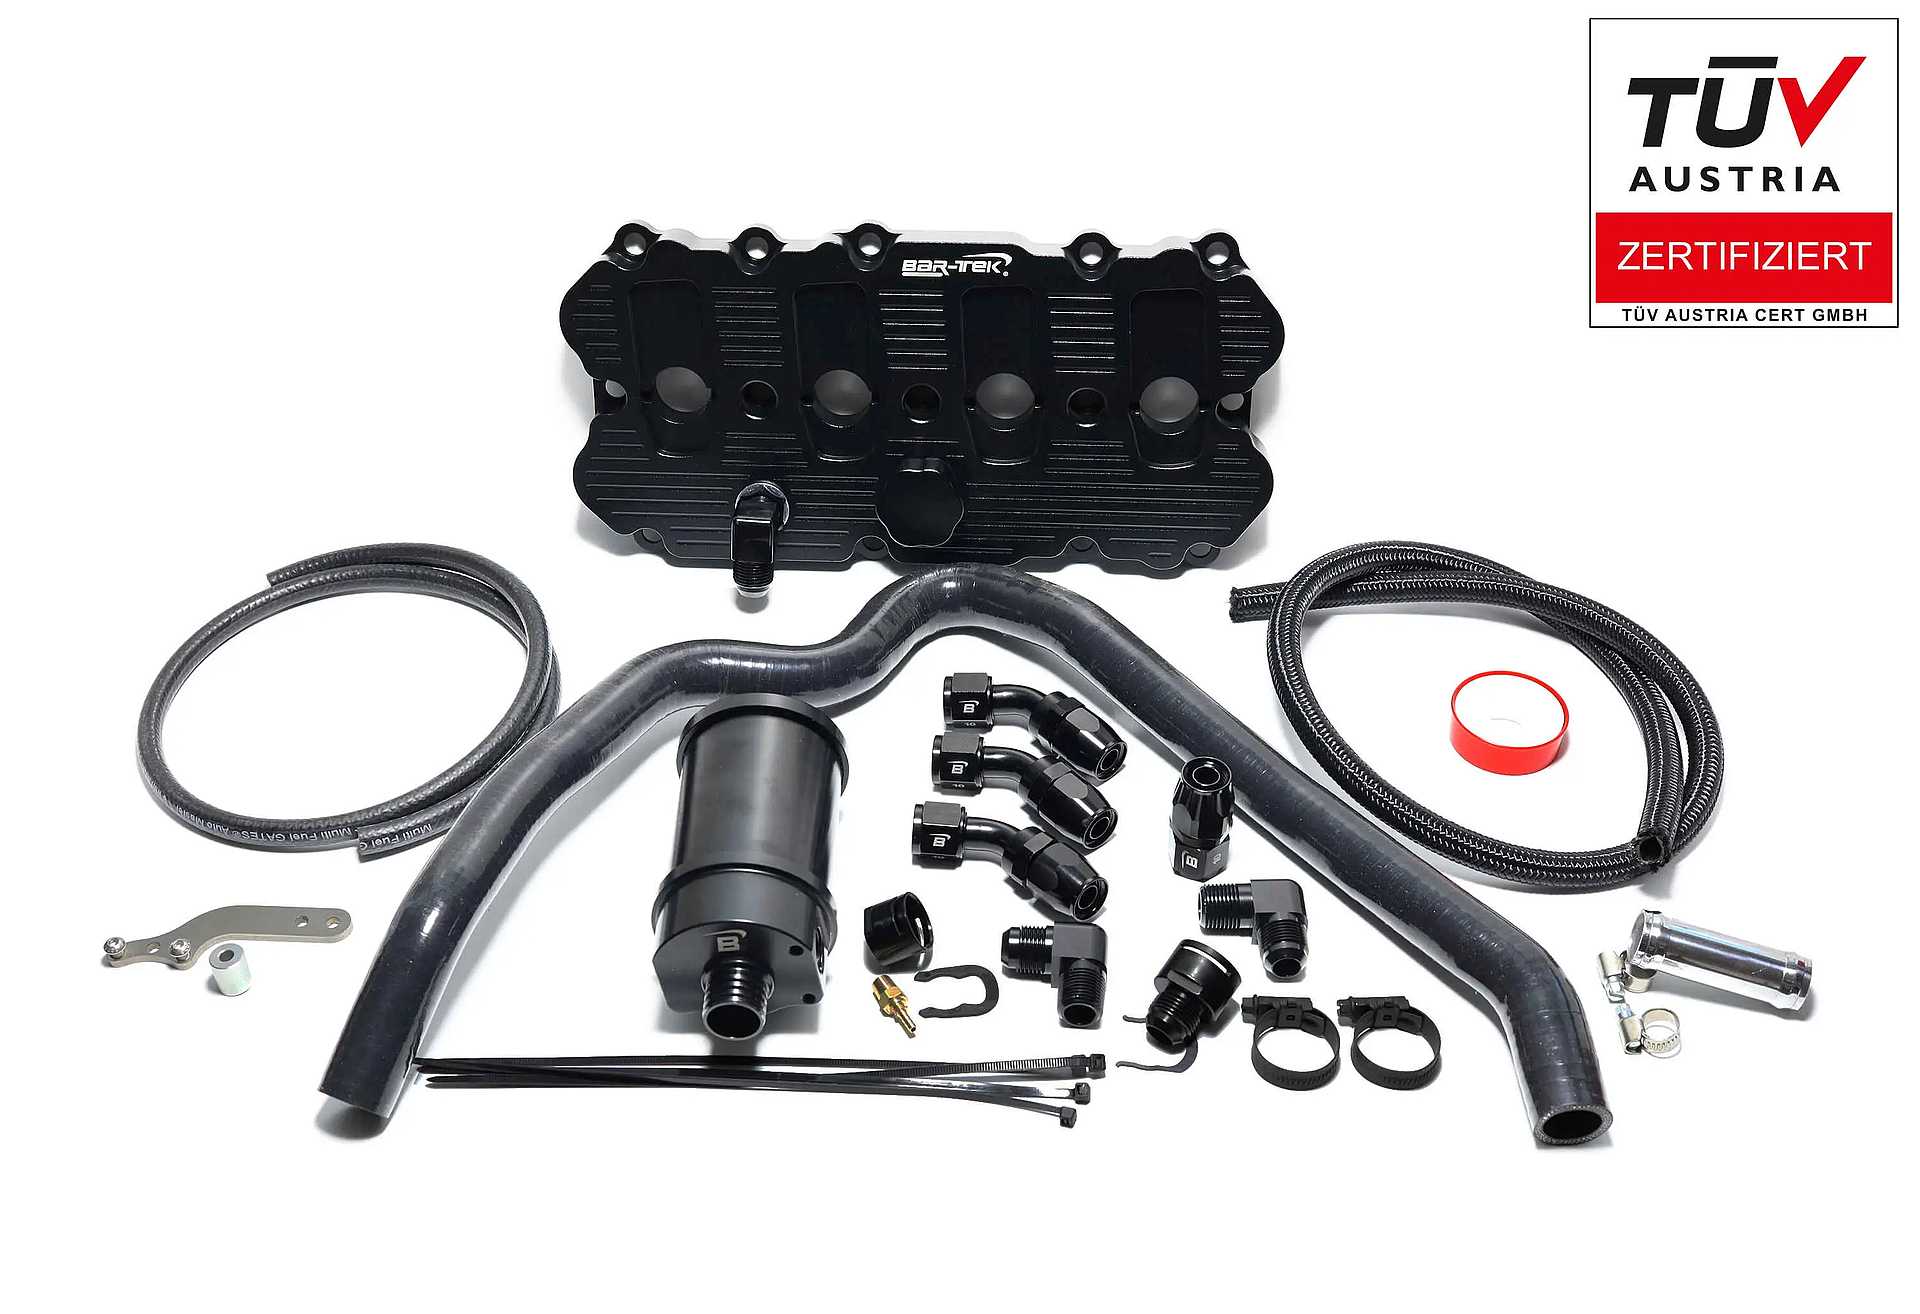 2.0L TFSI EA113 Oil Catchtank Kit with Billet Valve Cover with ECE